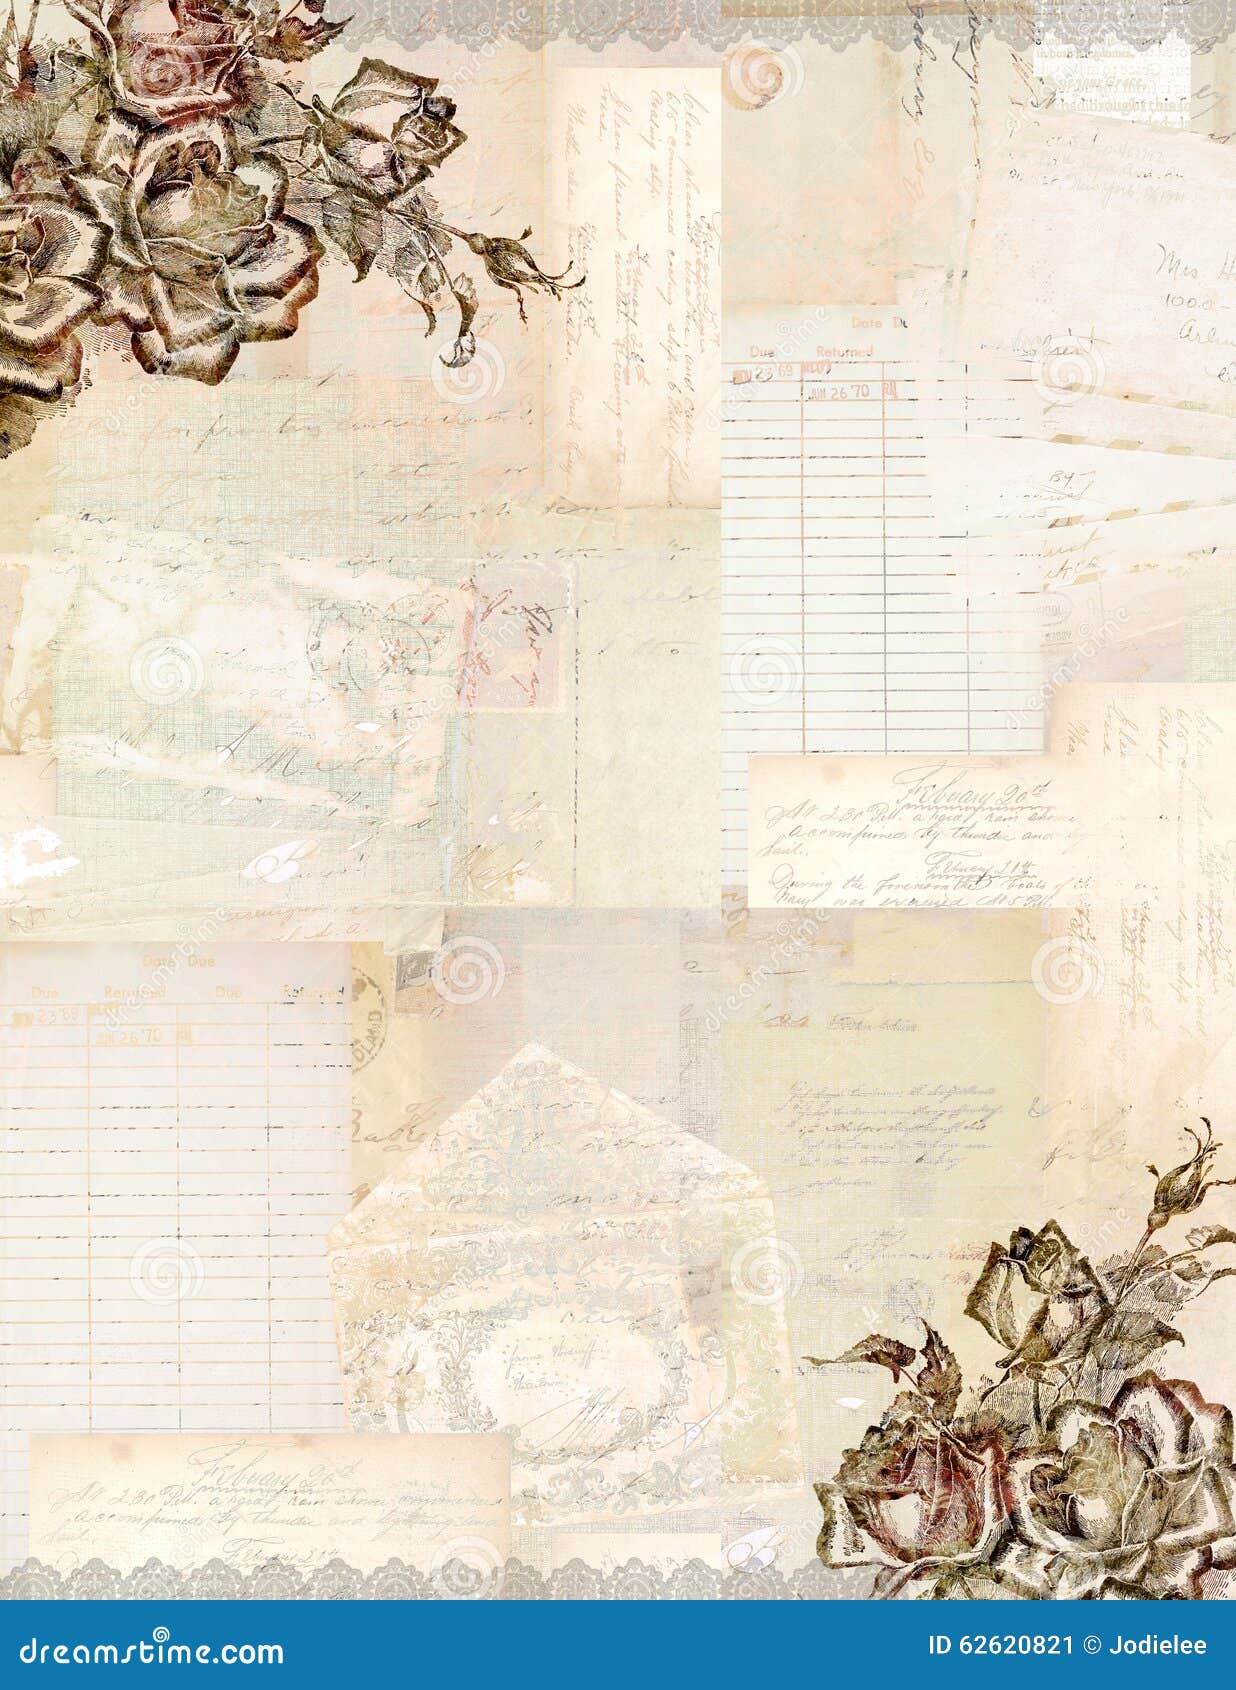 vintage grungy antique collage background with flowers, and ephemera